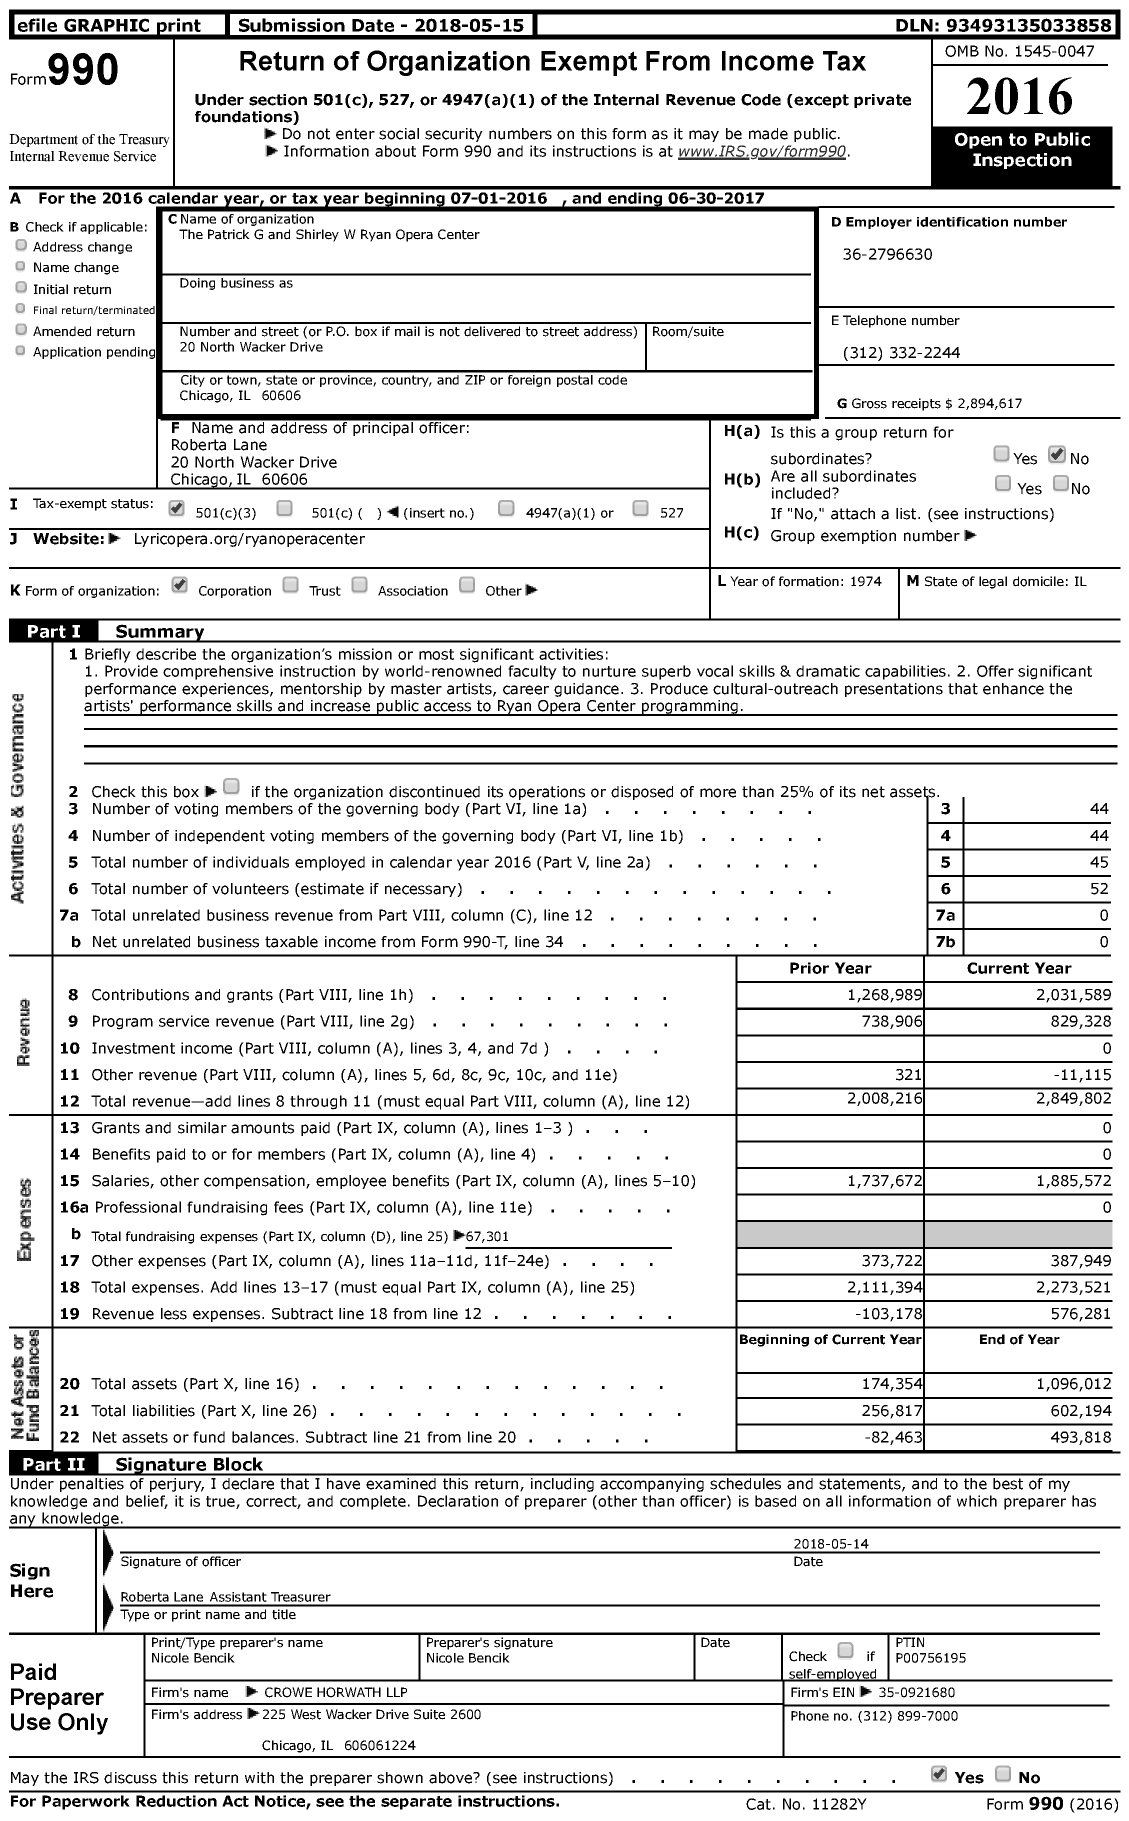 Image of first page of 2016 Form 990 for Patrick G and Shirley W Ryan Opera Center